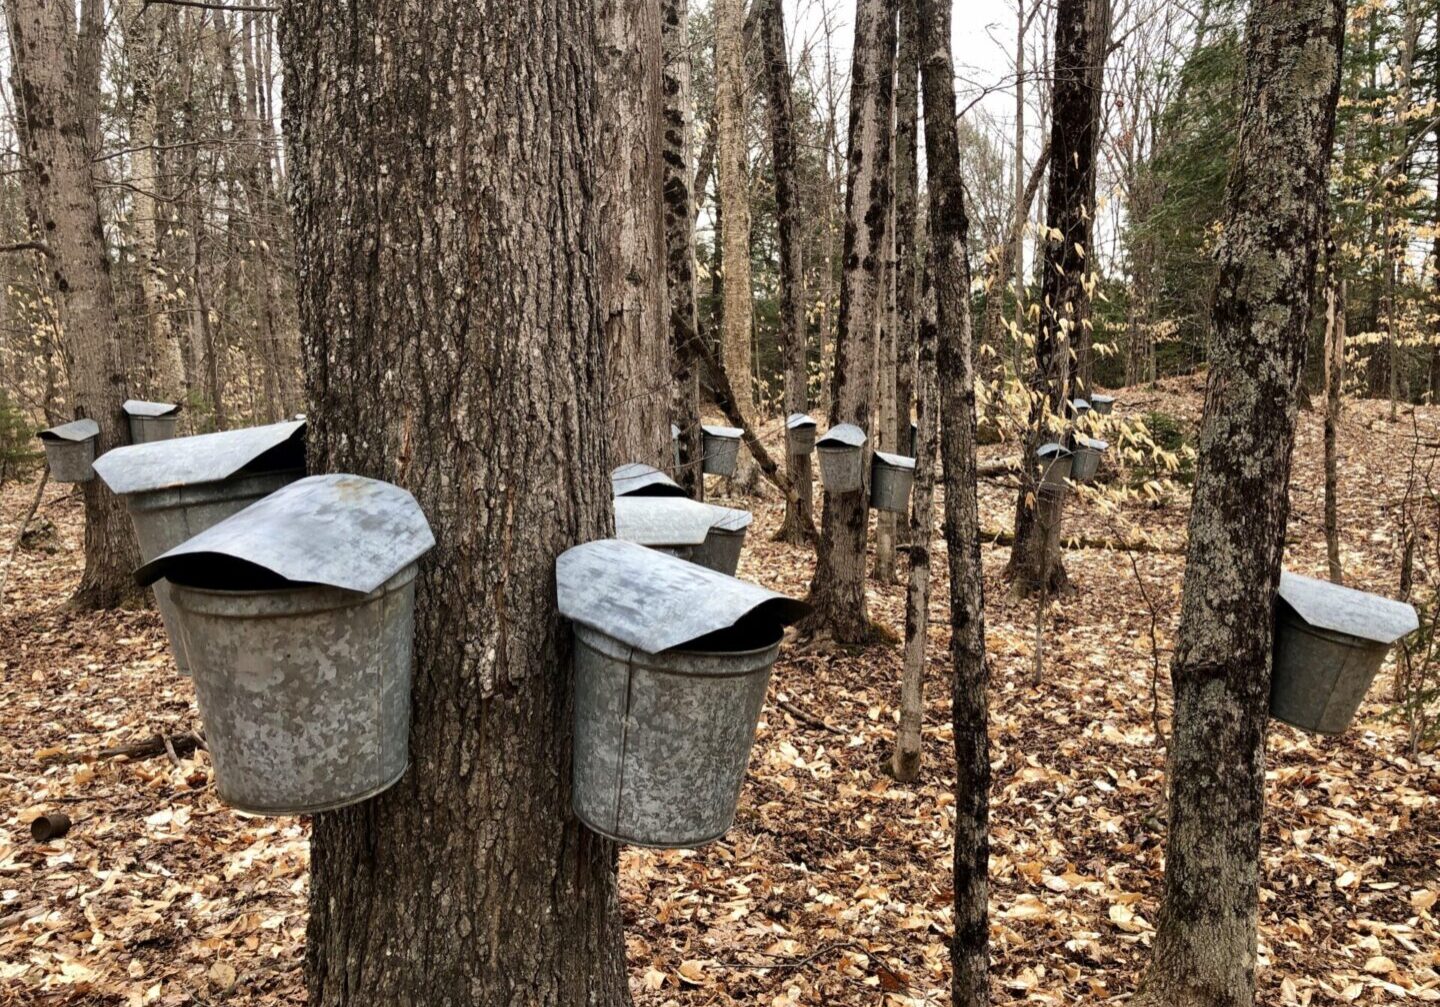 A group of buckets hanging from trees in the woods.